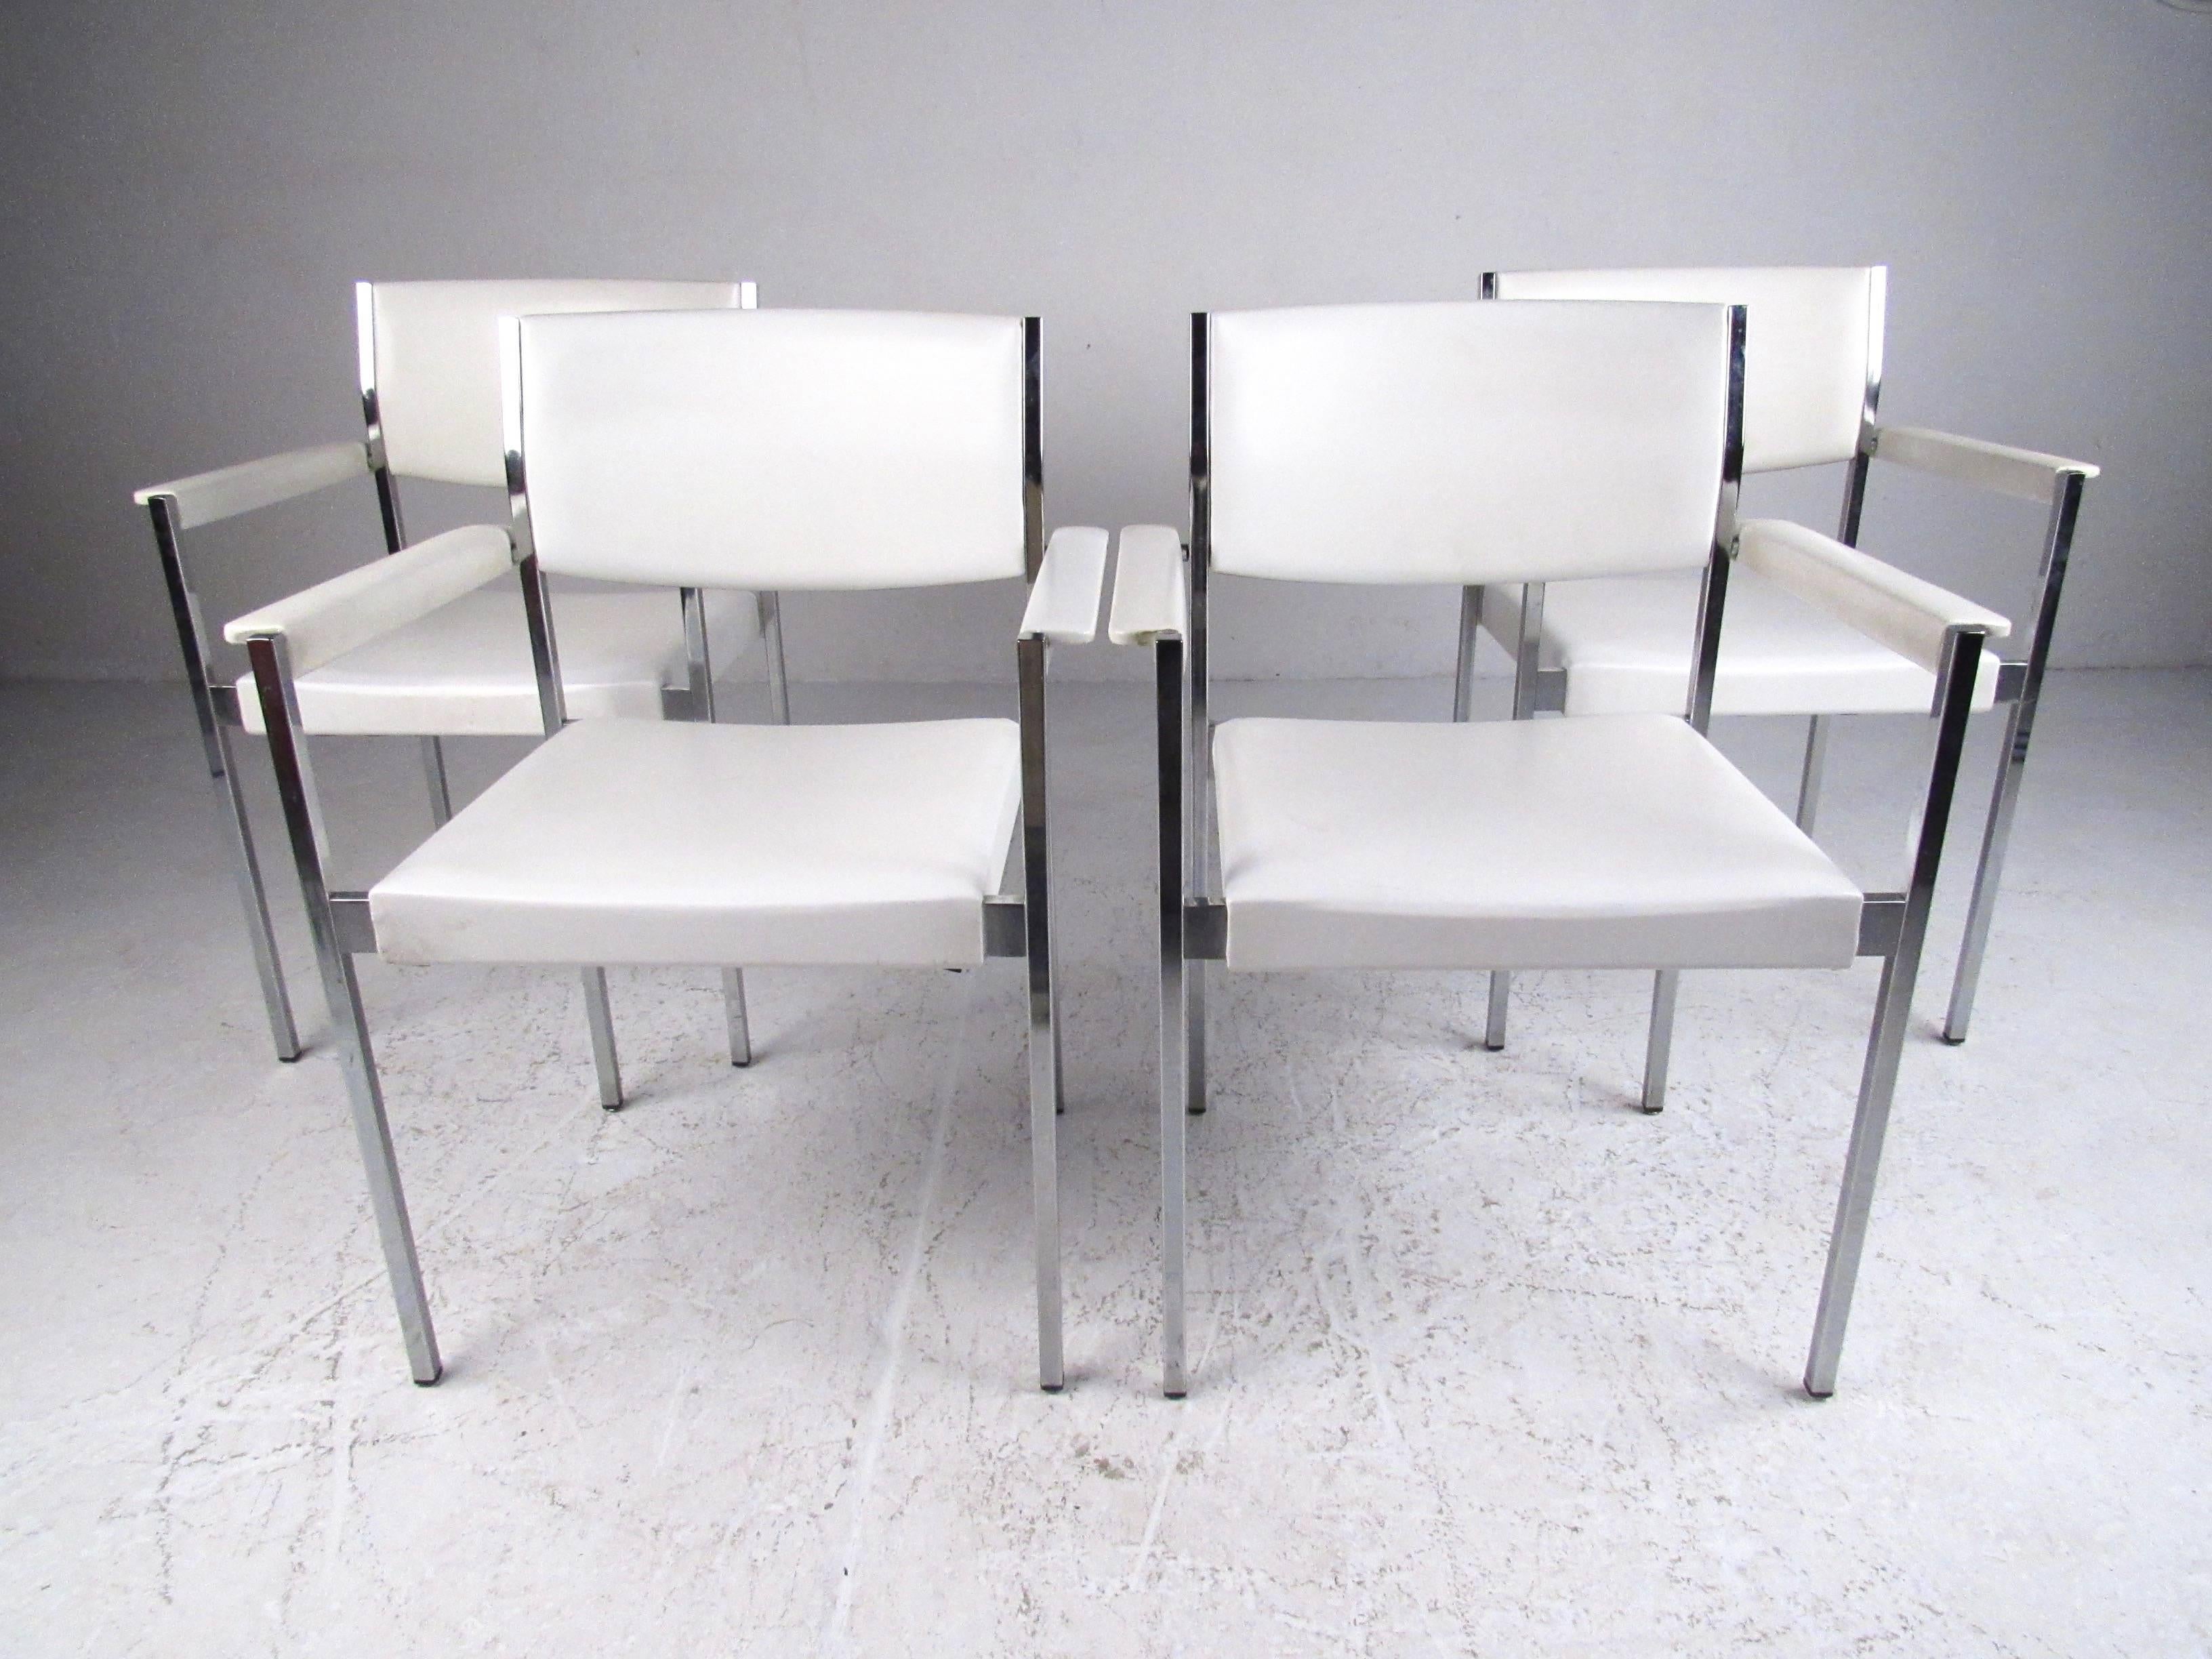 This set of four stylish and comfortable dining chairs by John Stuart Inc feature spacious vinyl seats, upholstered armrests, and sturdy chrome frame construction. Original makers mark affixed on this Mid-Century Modern set, please confirm item